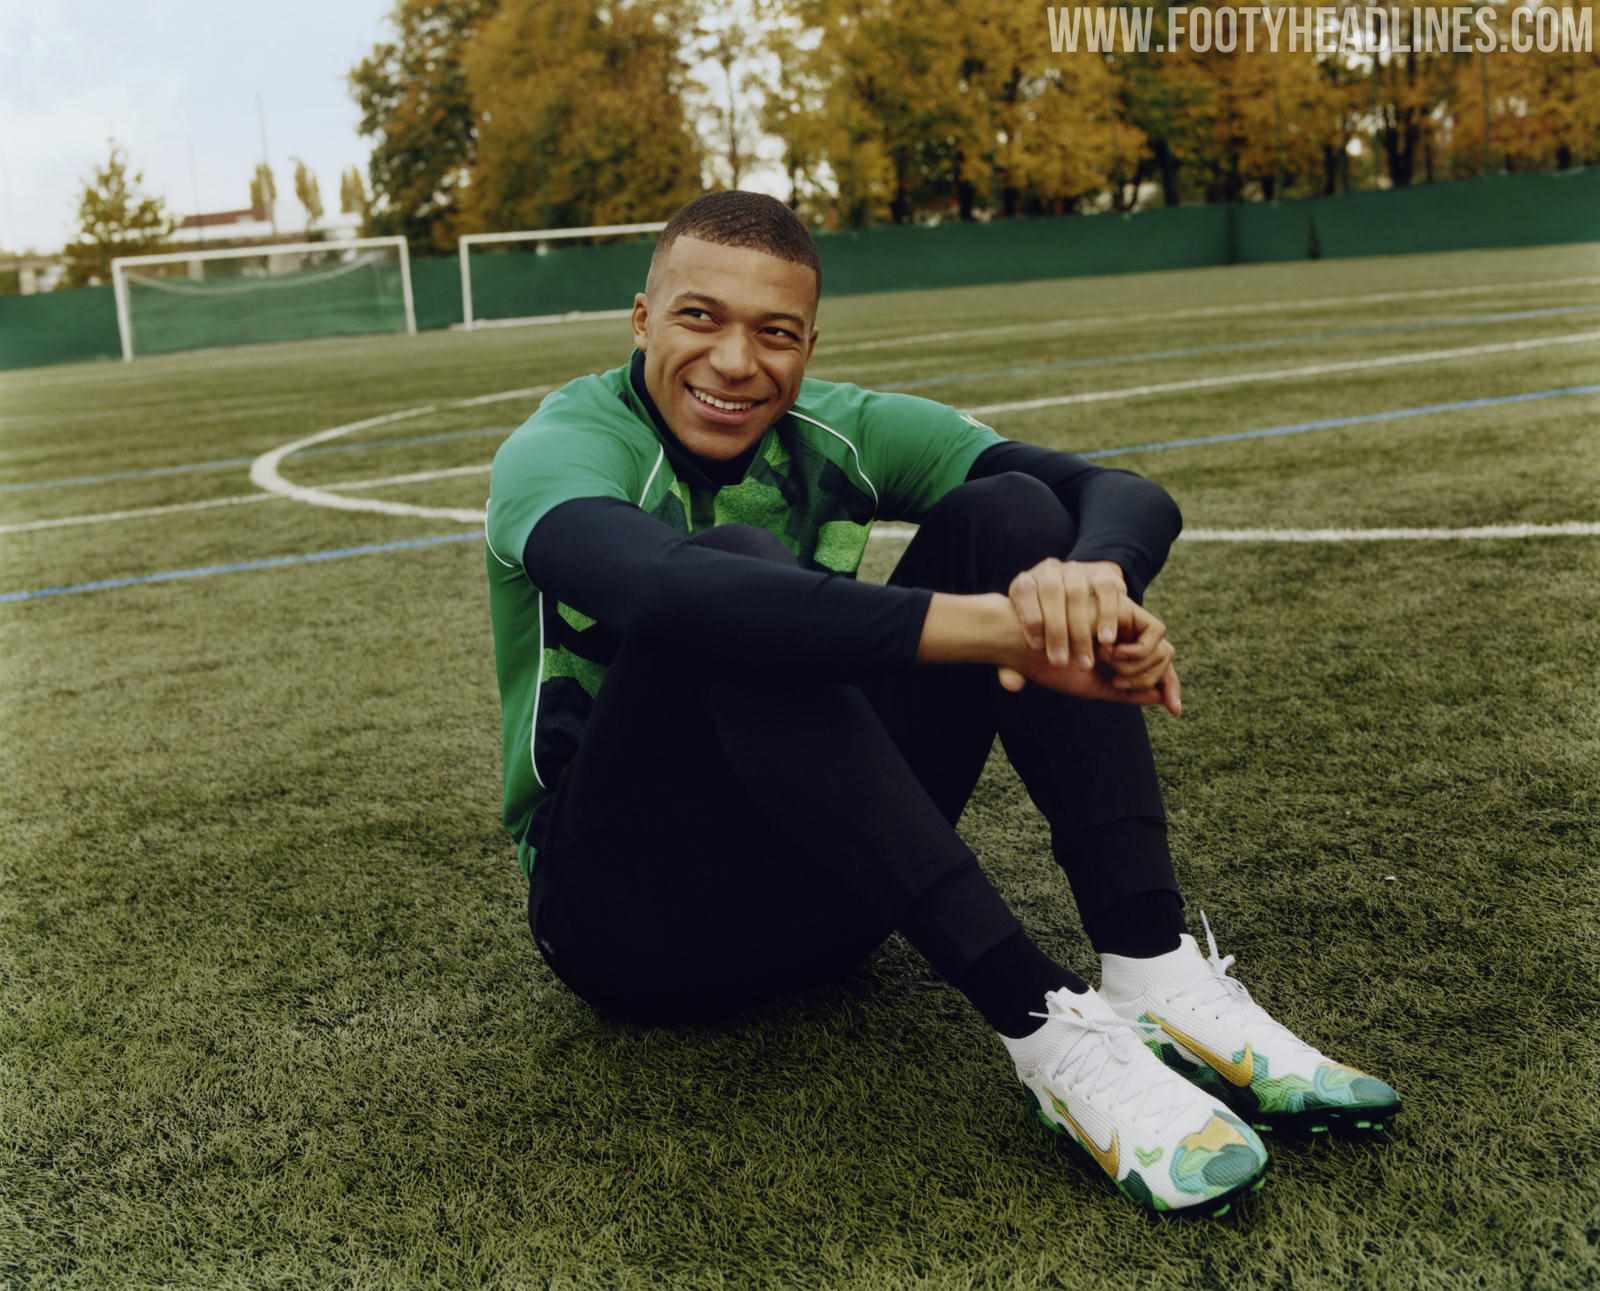 Nike Mercurial Superfly Mbappe 'Bondy Dreams' Boots Released - First Signature - Footy Headlines